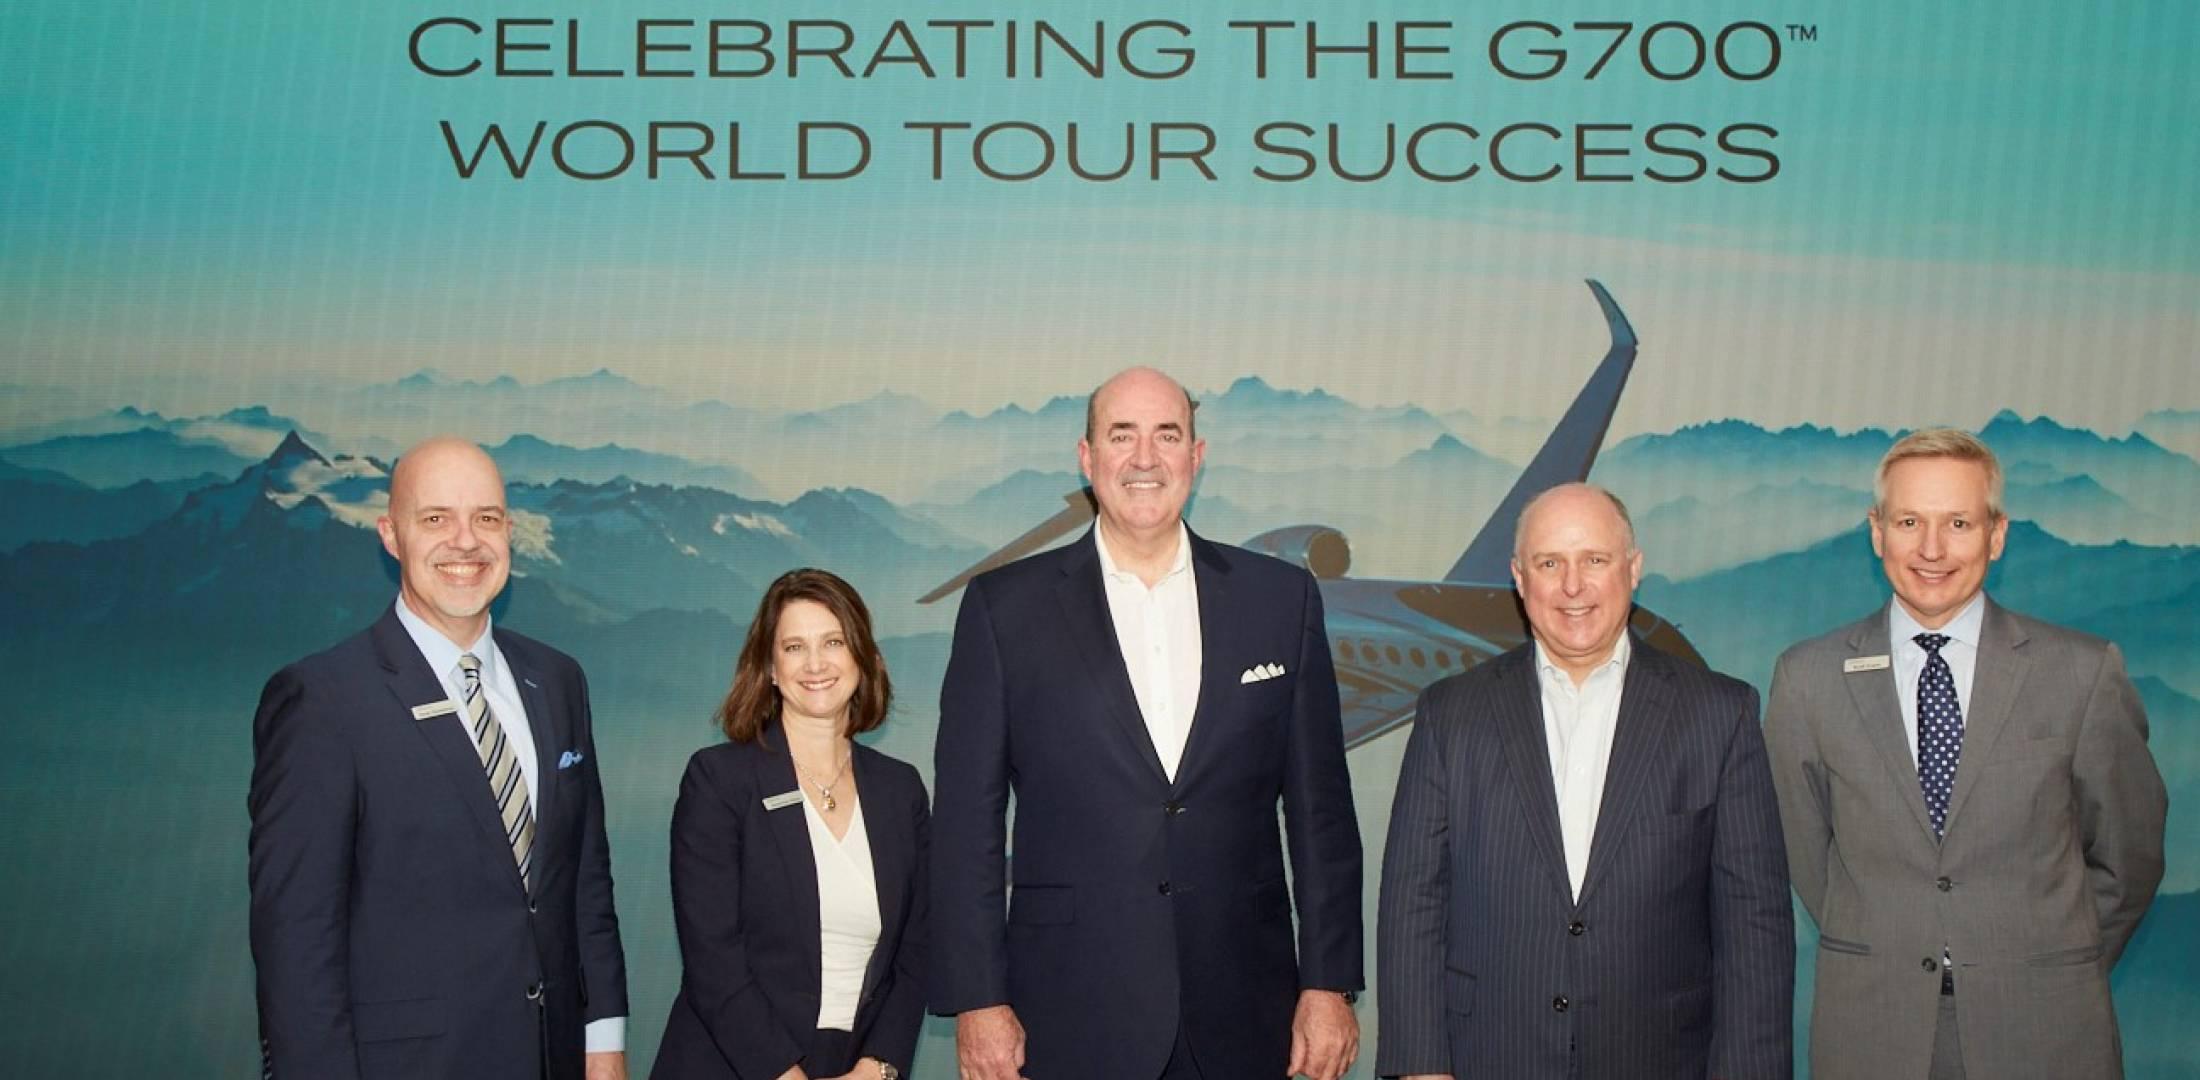 At a February 27 gathering at its Manhattan Sales and Design Center, Gulfstream Aerospace president Mark Burns (center) and other company executives celebrate the 25 speed records amassed by the G700 on its recently concluded world tour. The G700 is slated to be FAA certified and enter service this summer. (Photo: Gulfstream Aerospace)